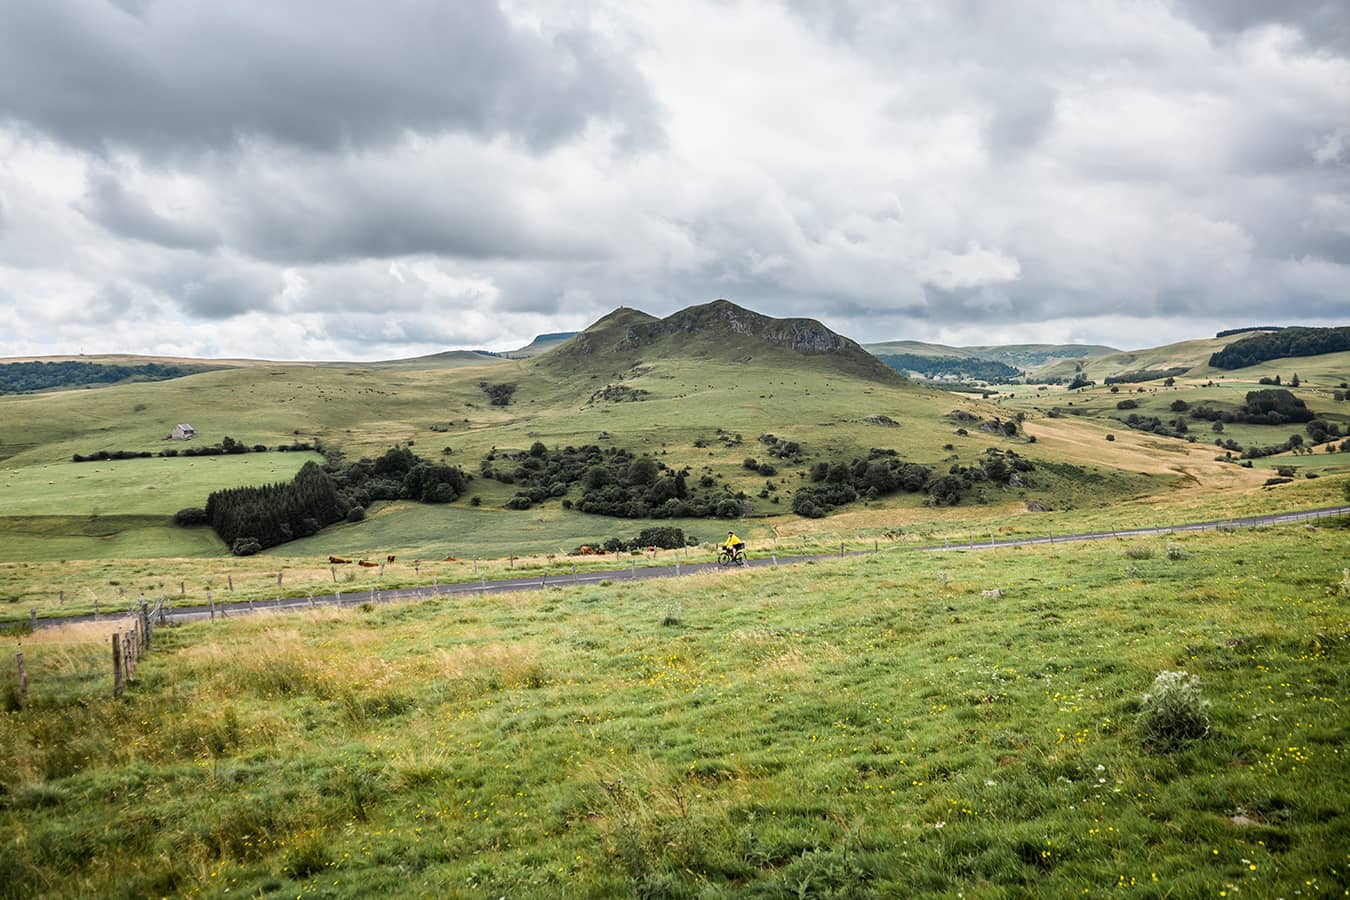 Sophie Gateau: A Tour of the Volcanoes of Auvergne